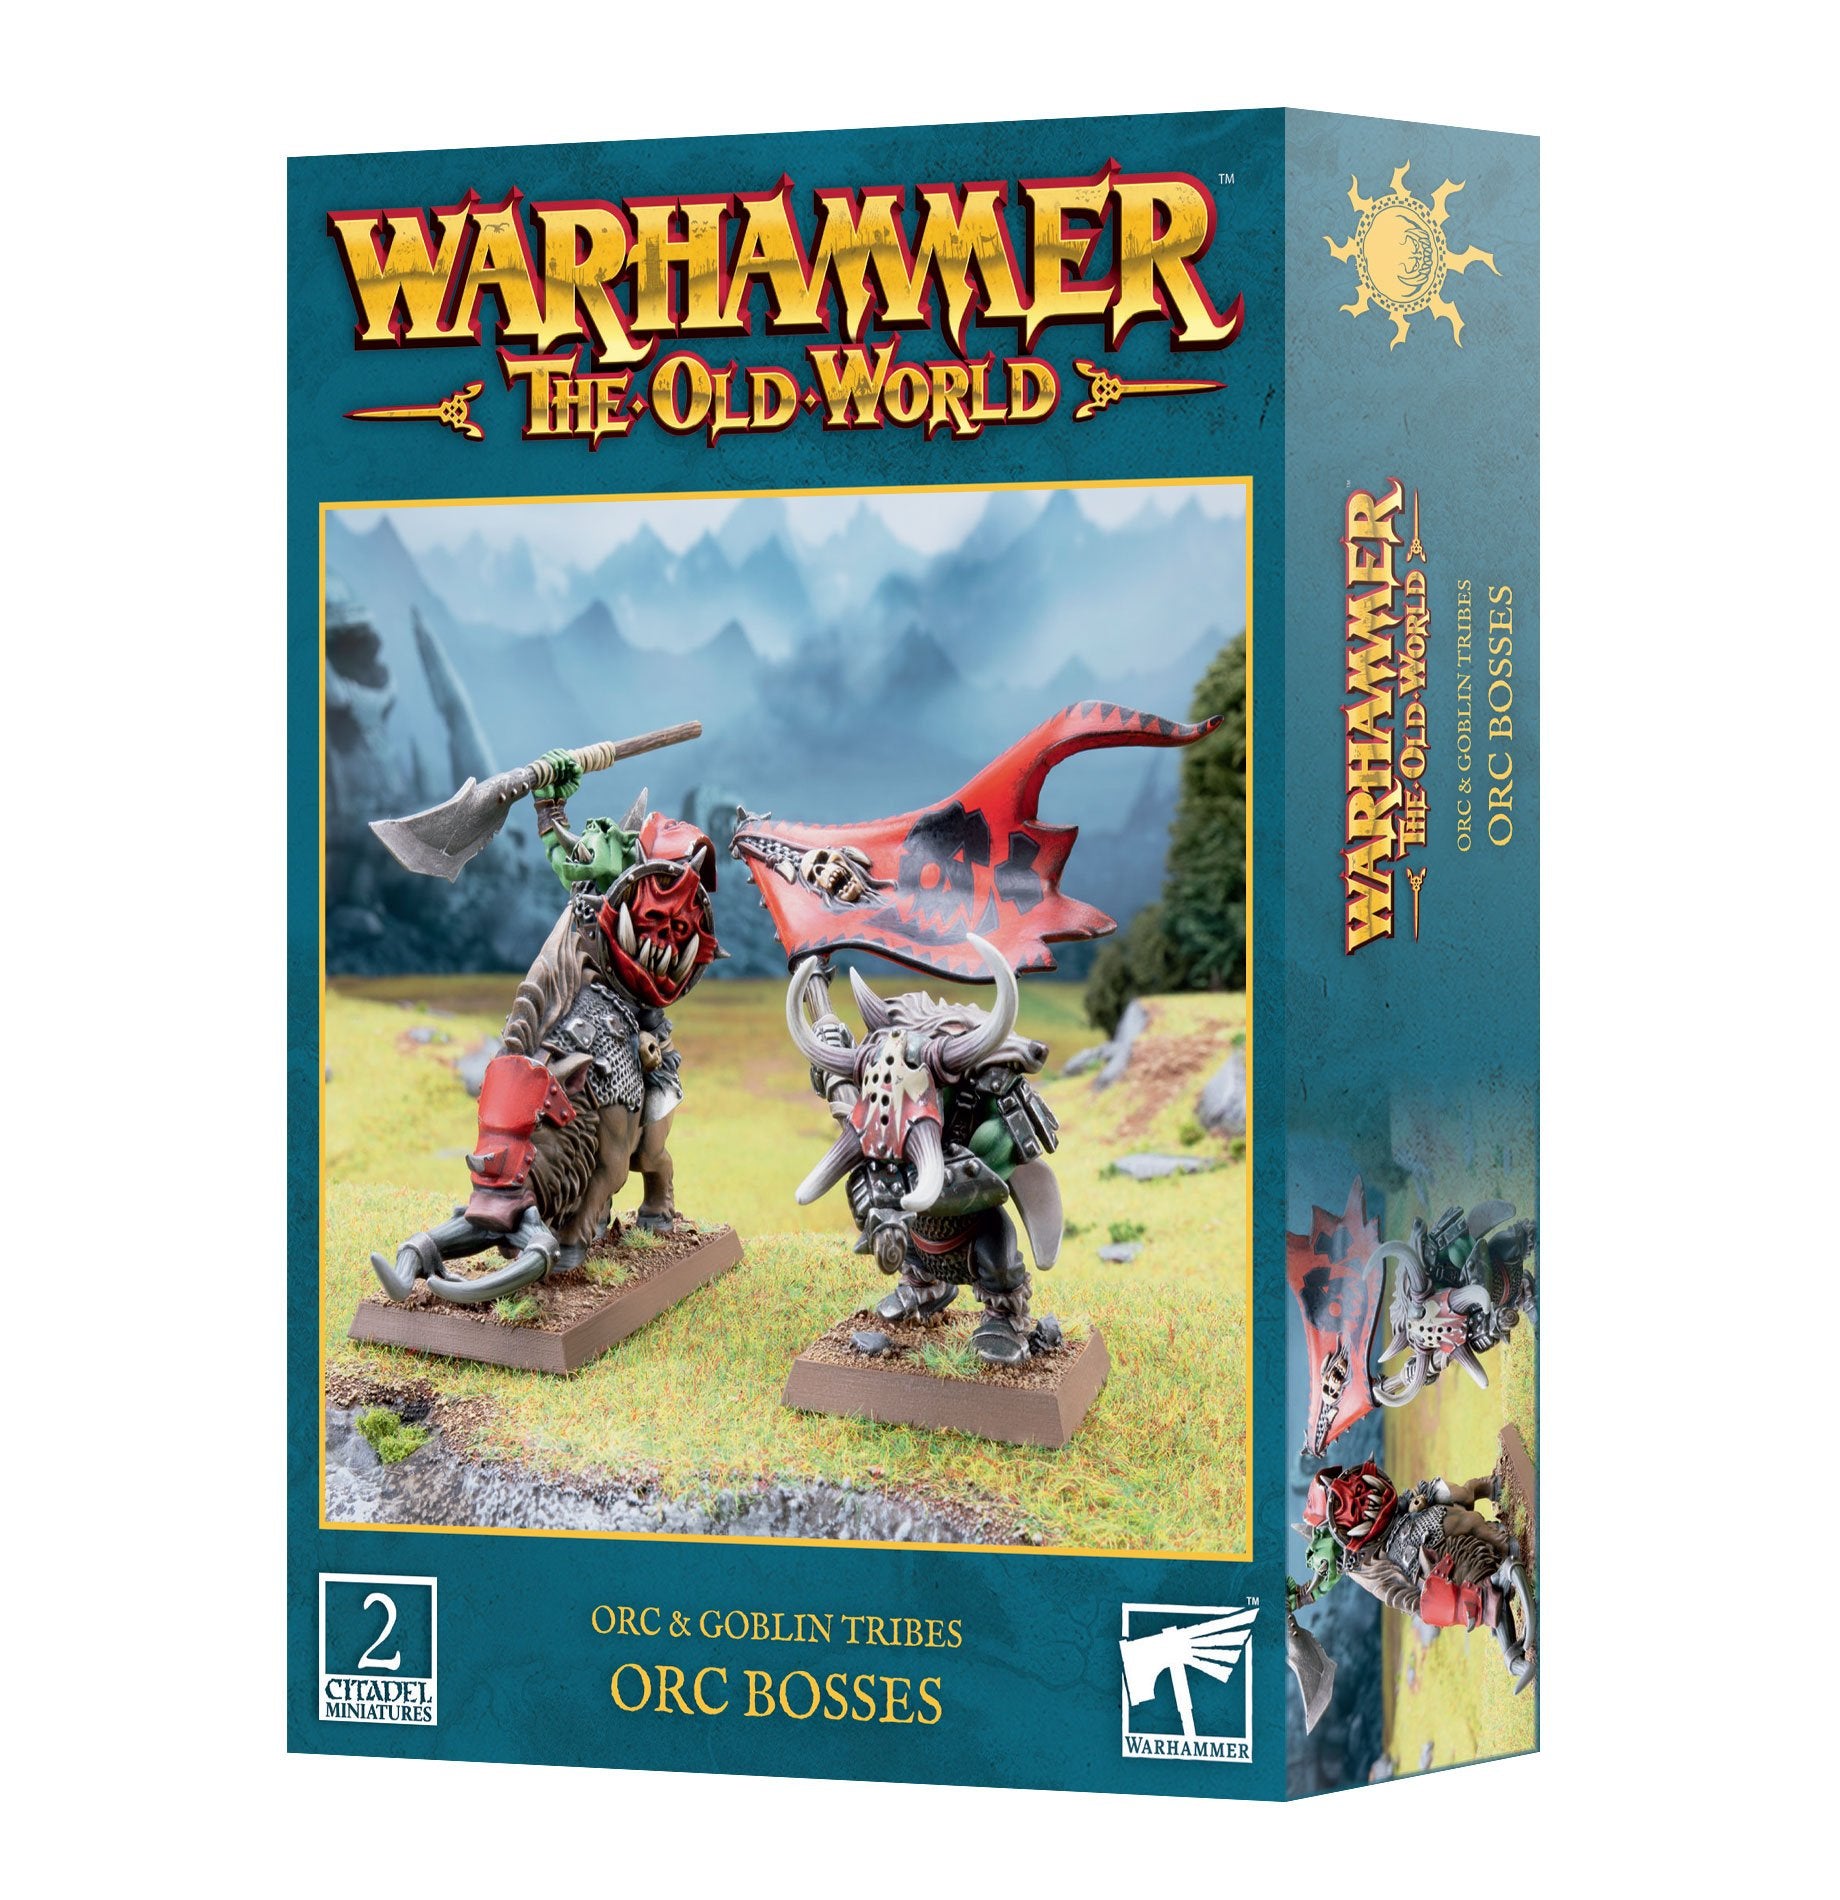 Warhammer The Old World: Orc & Goblin Tribes Orc Bosses